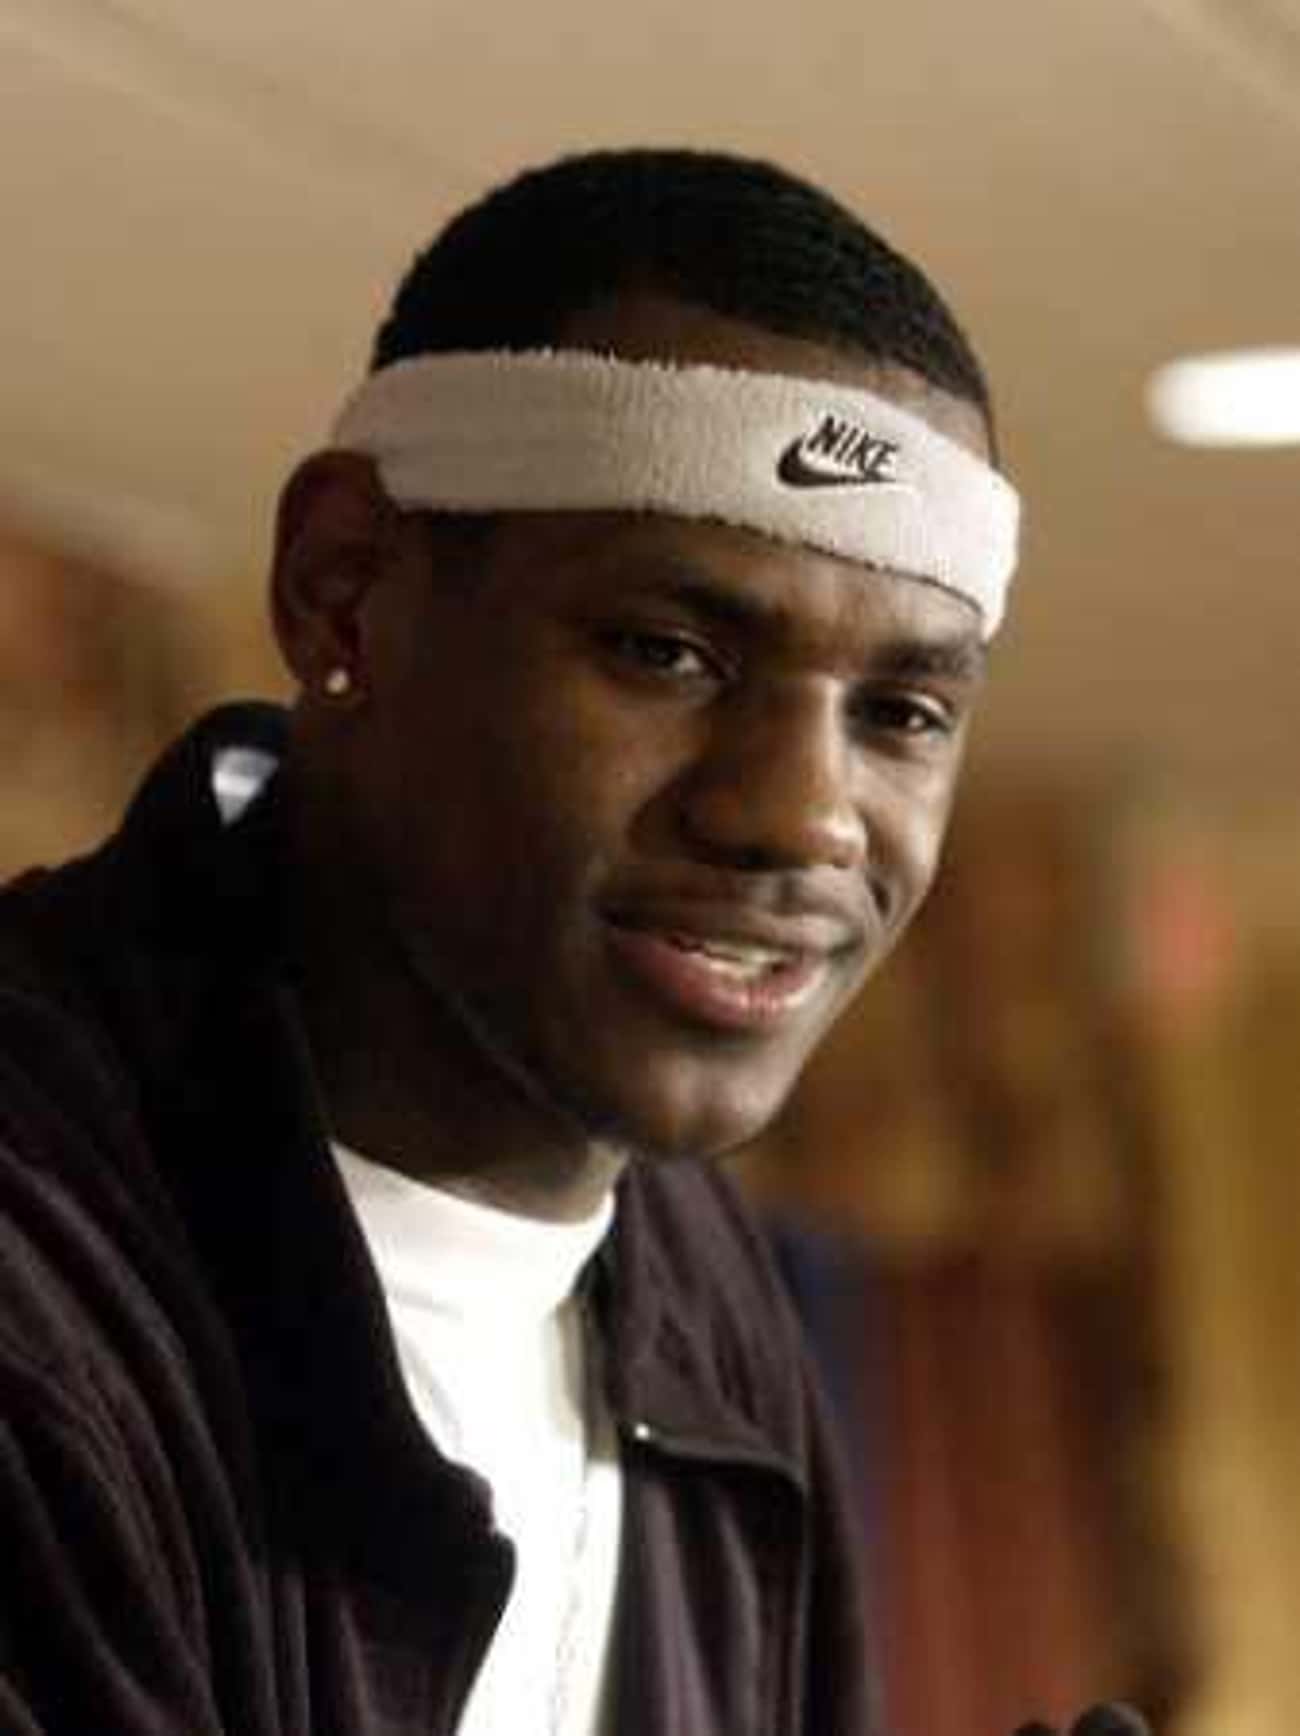 Young LeBron James in Black Jacket and White T-Shirt